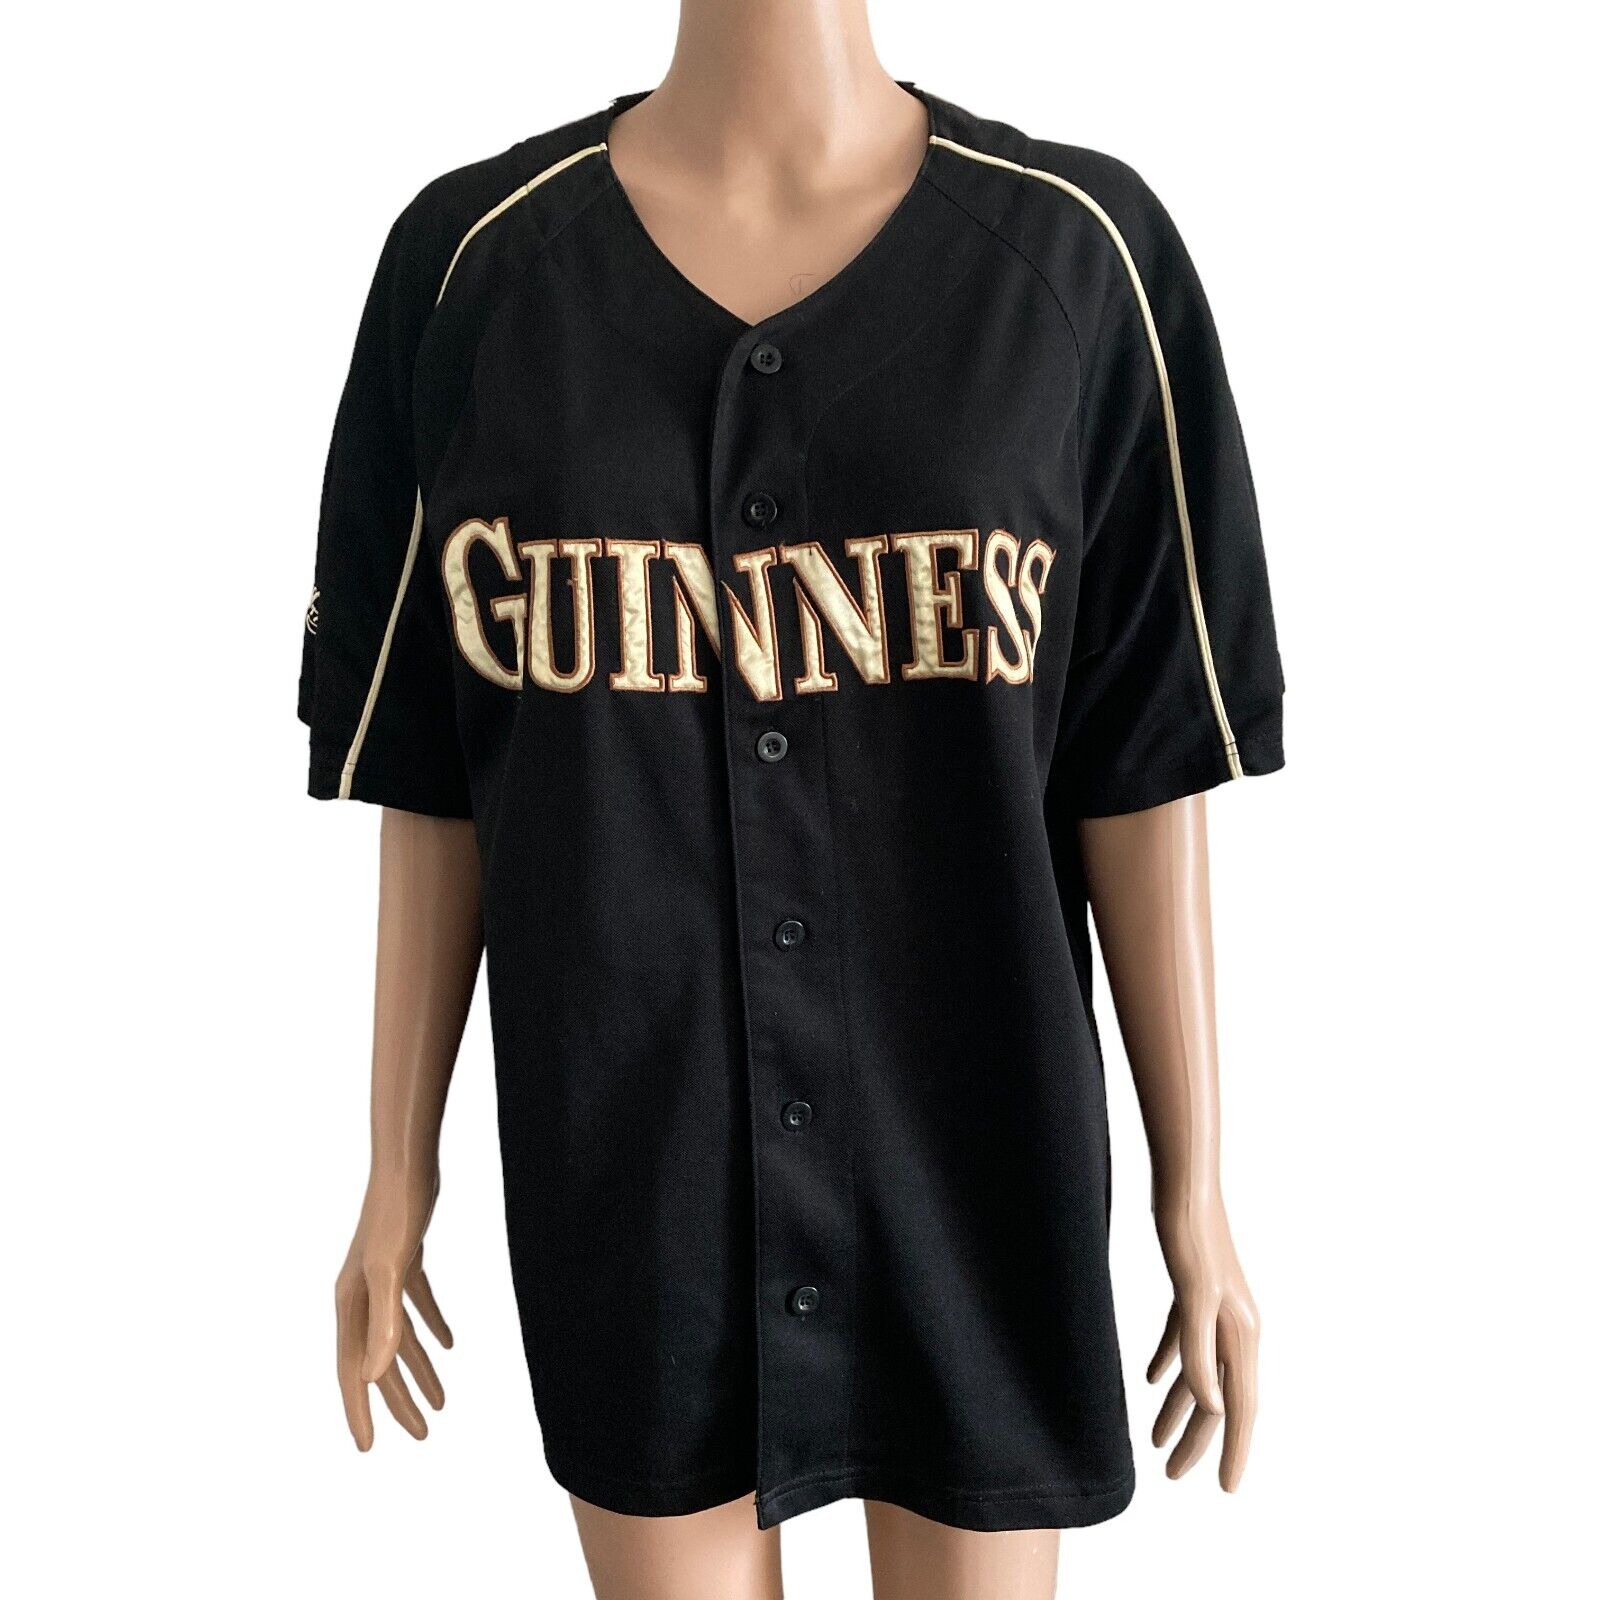 Official Guinness Beer Baseball Jersey Mens Size XL Black Gold Stitched stout